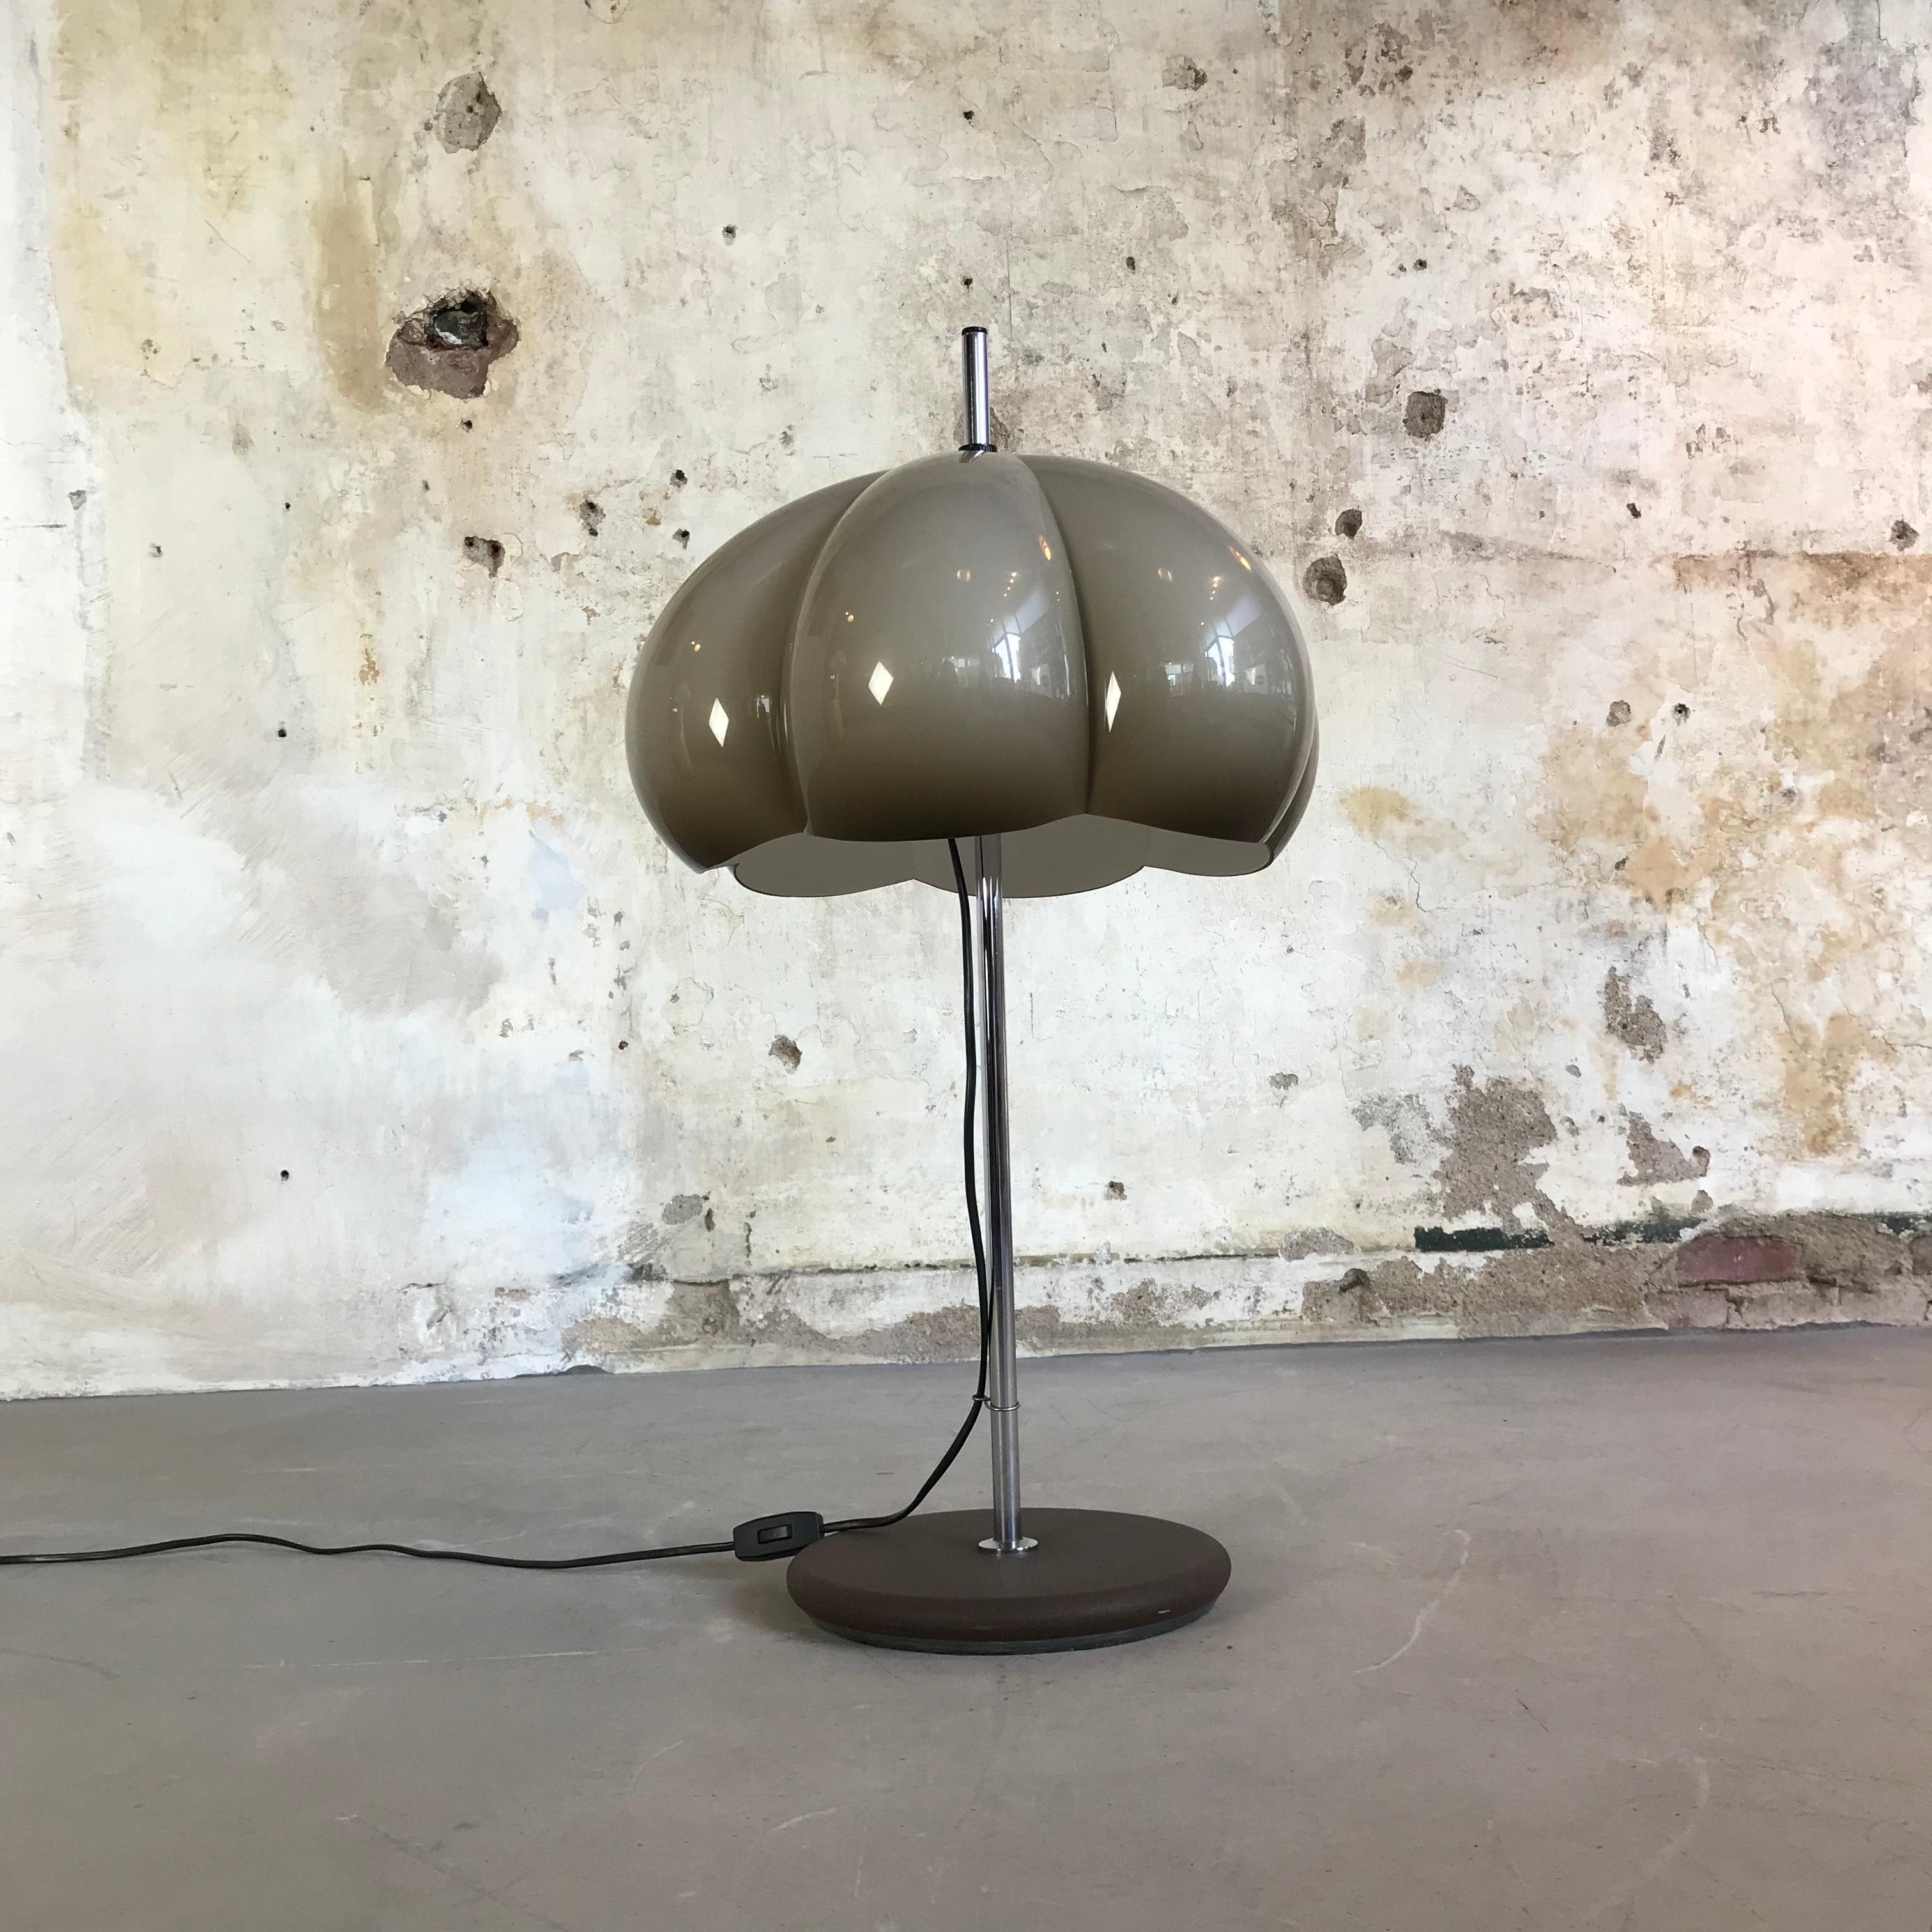 A beautiful, very rare and iconic lamp from the 1960s from the Atomic Mushroom Design series. A metal stand and a 'pumpkin' Plexiglas lampshade, adjustable in height. Manufactured by Dijkstra Lamps – the oldest Dutch lamp manufacturer established in